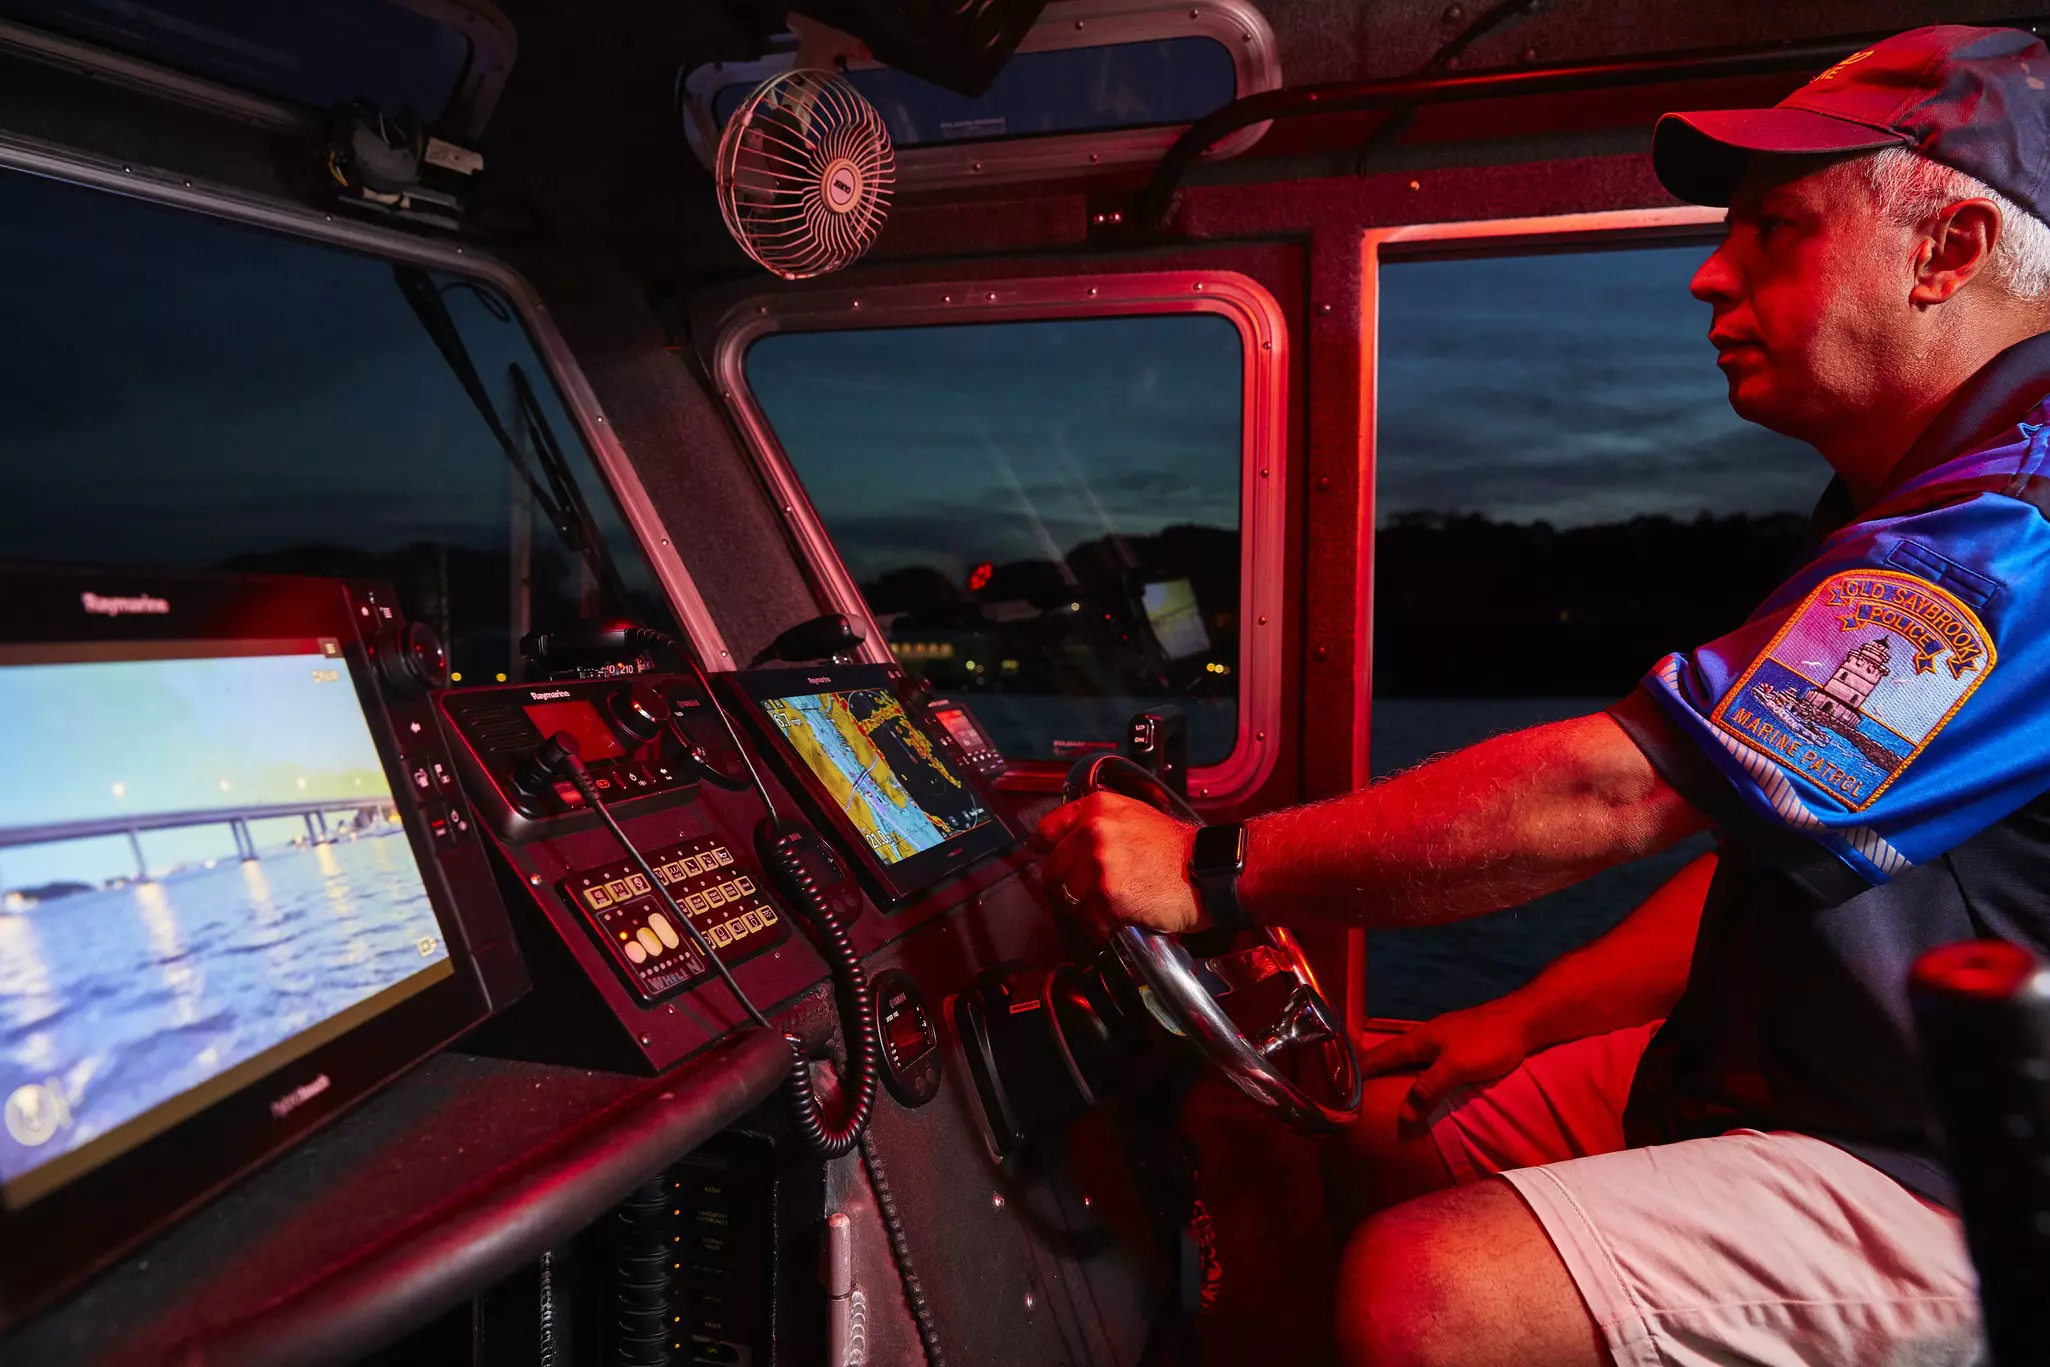 Lowlight conditions on a police boat